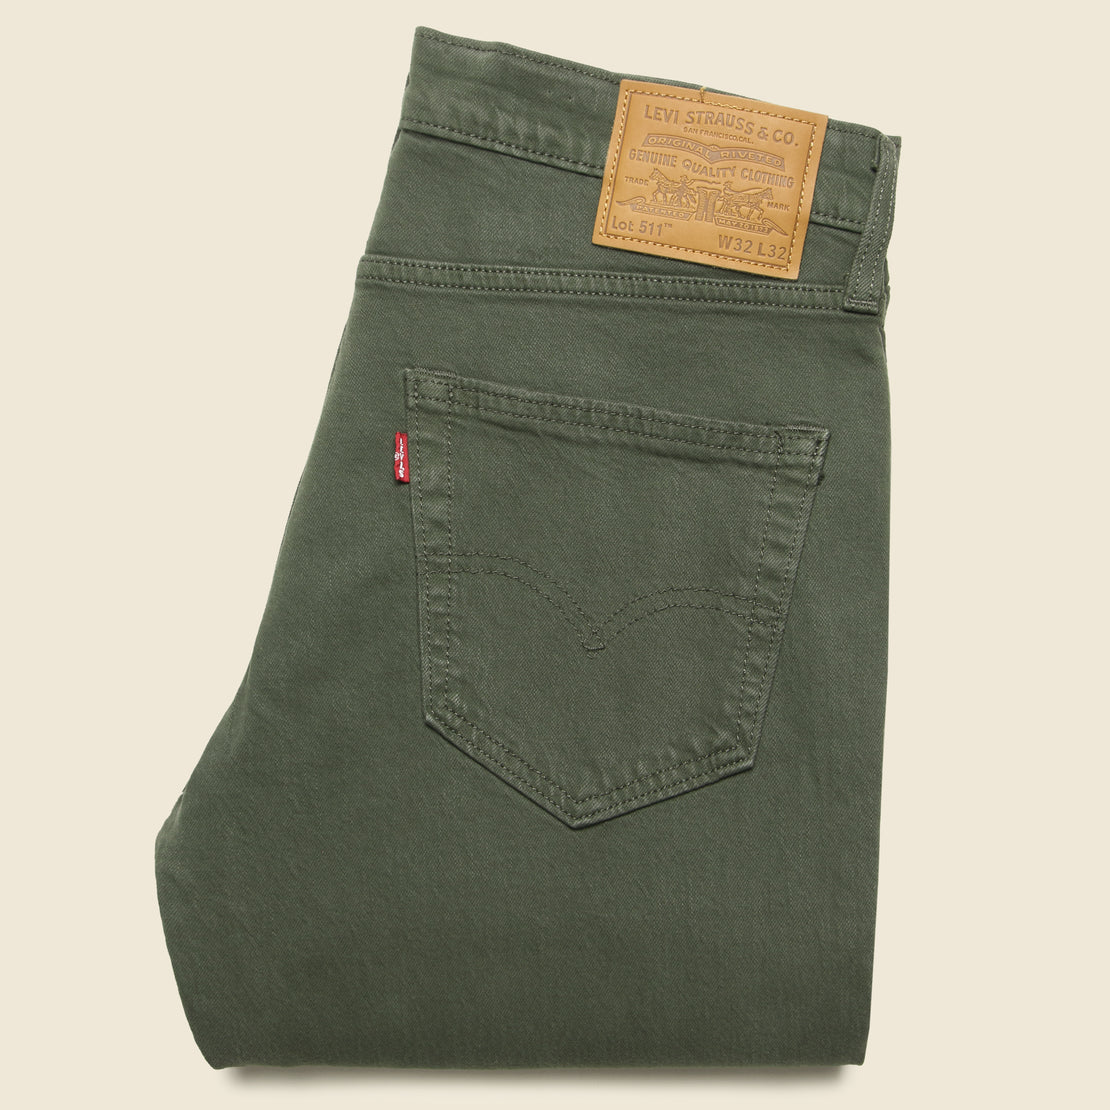 511 Slim Color Jean - My Friends (Olive)